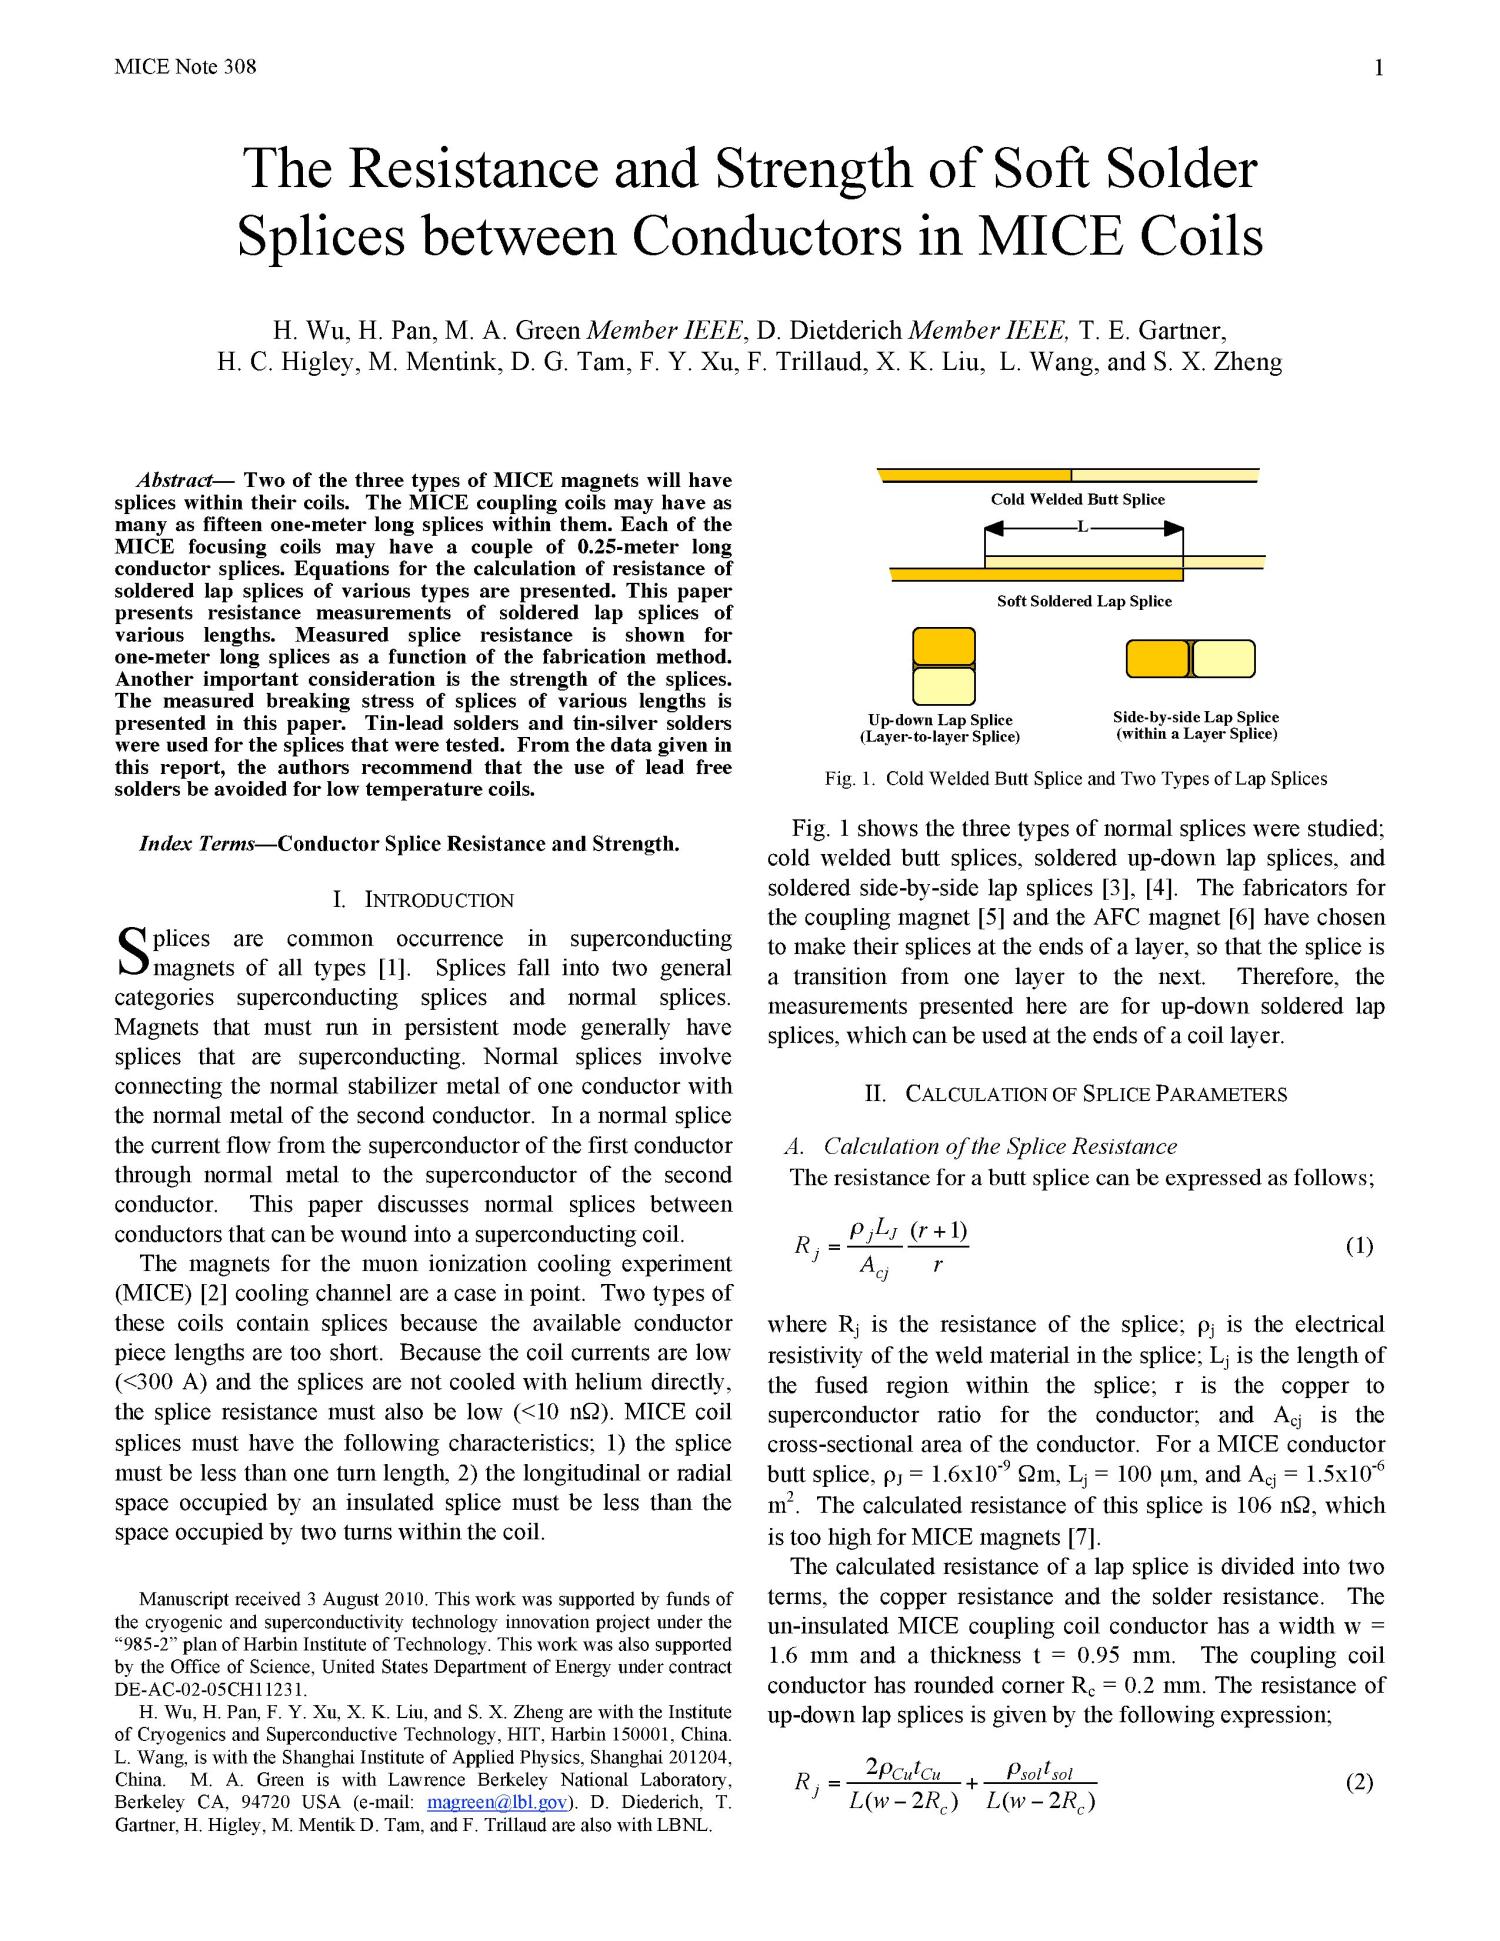 The Resistance and Strength of Soft Solder Splices between Conductors in MICE Coils
                                                
                                                    [Sequence #]: 1 of 4
                                                